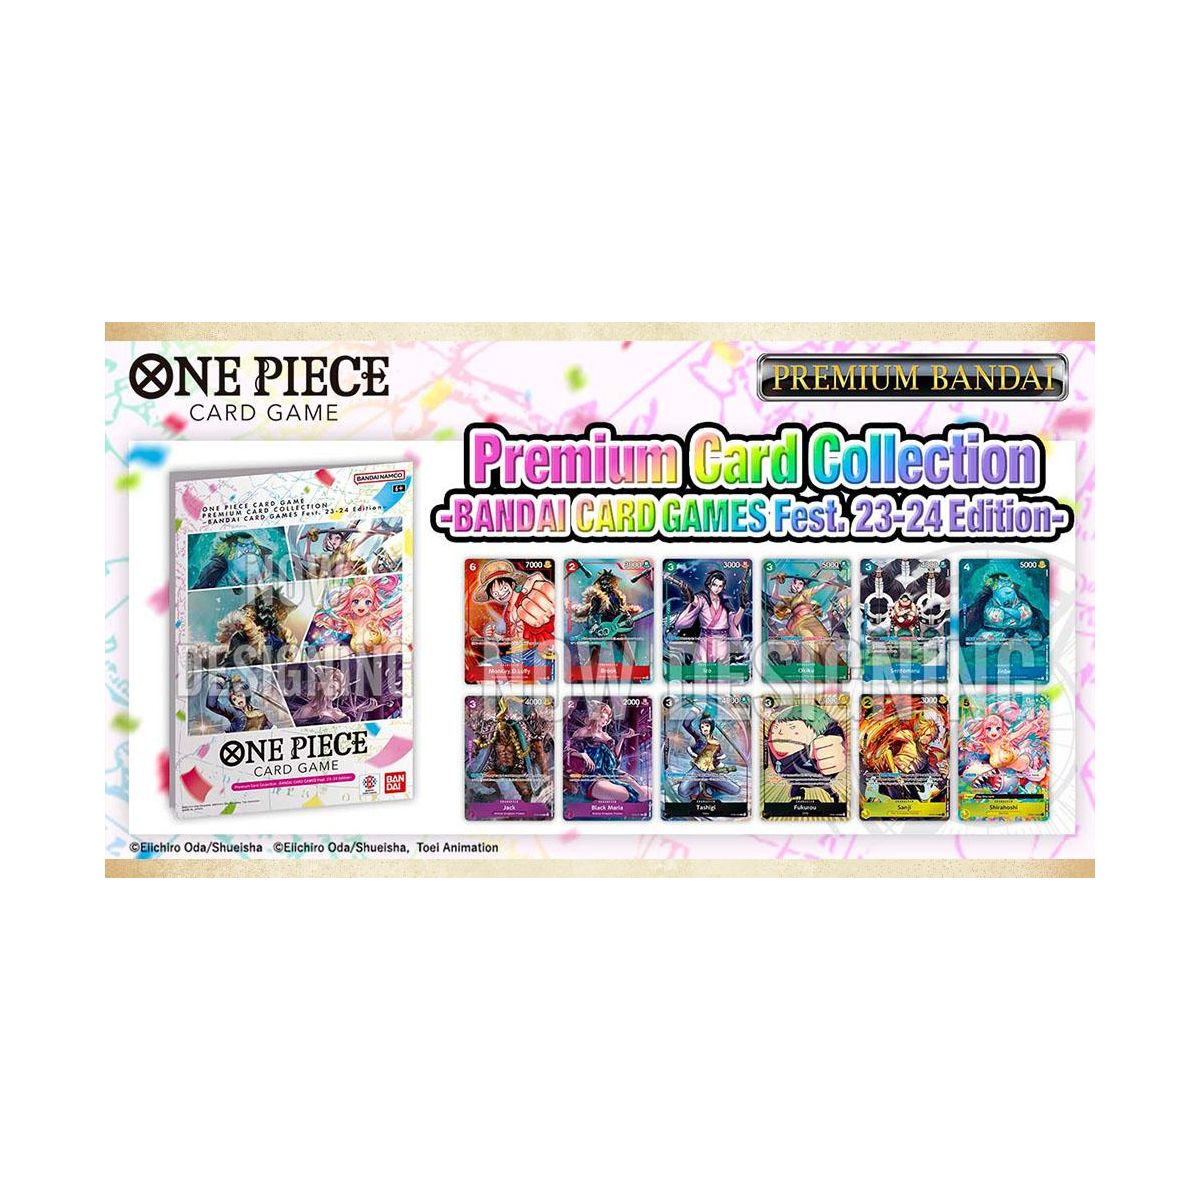 Item One Piece Card Game - Premium Card Collection - BANDAI CARD GAMES Fest. 23-24 Edition - Anglais